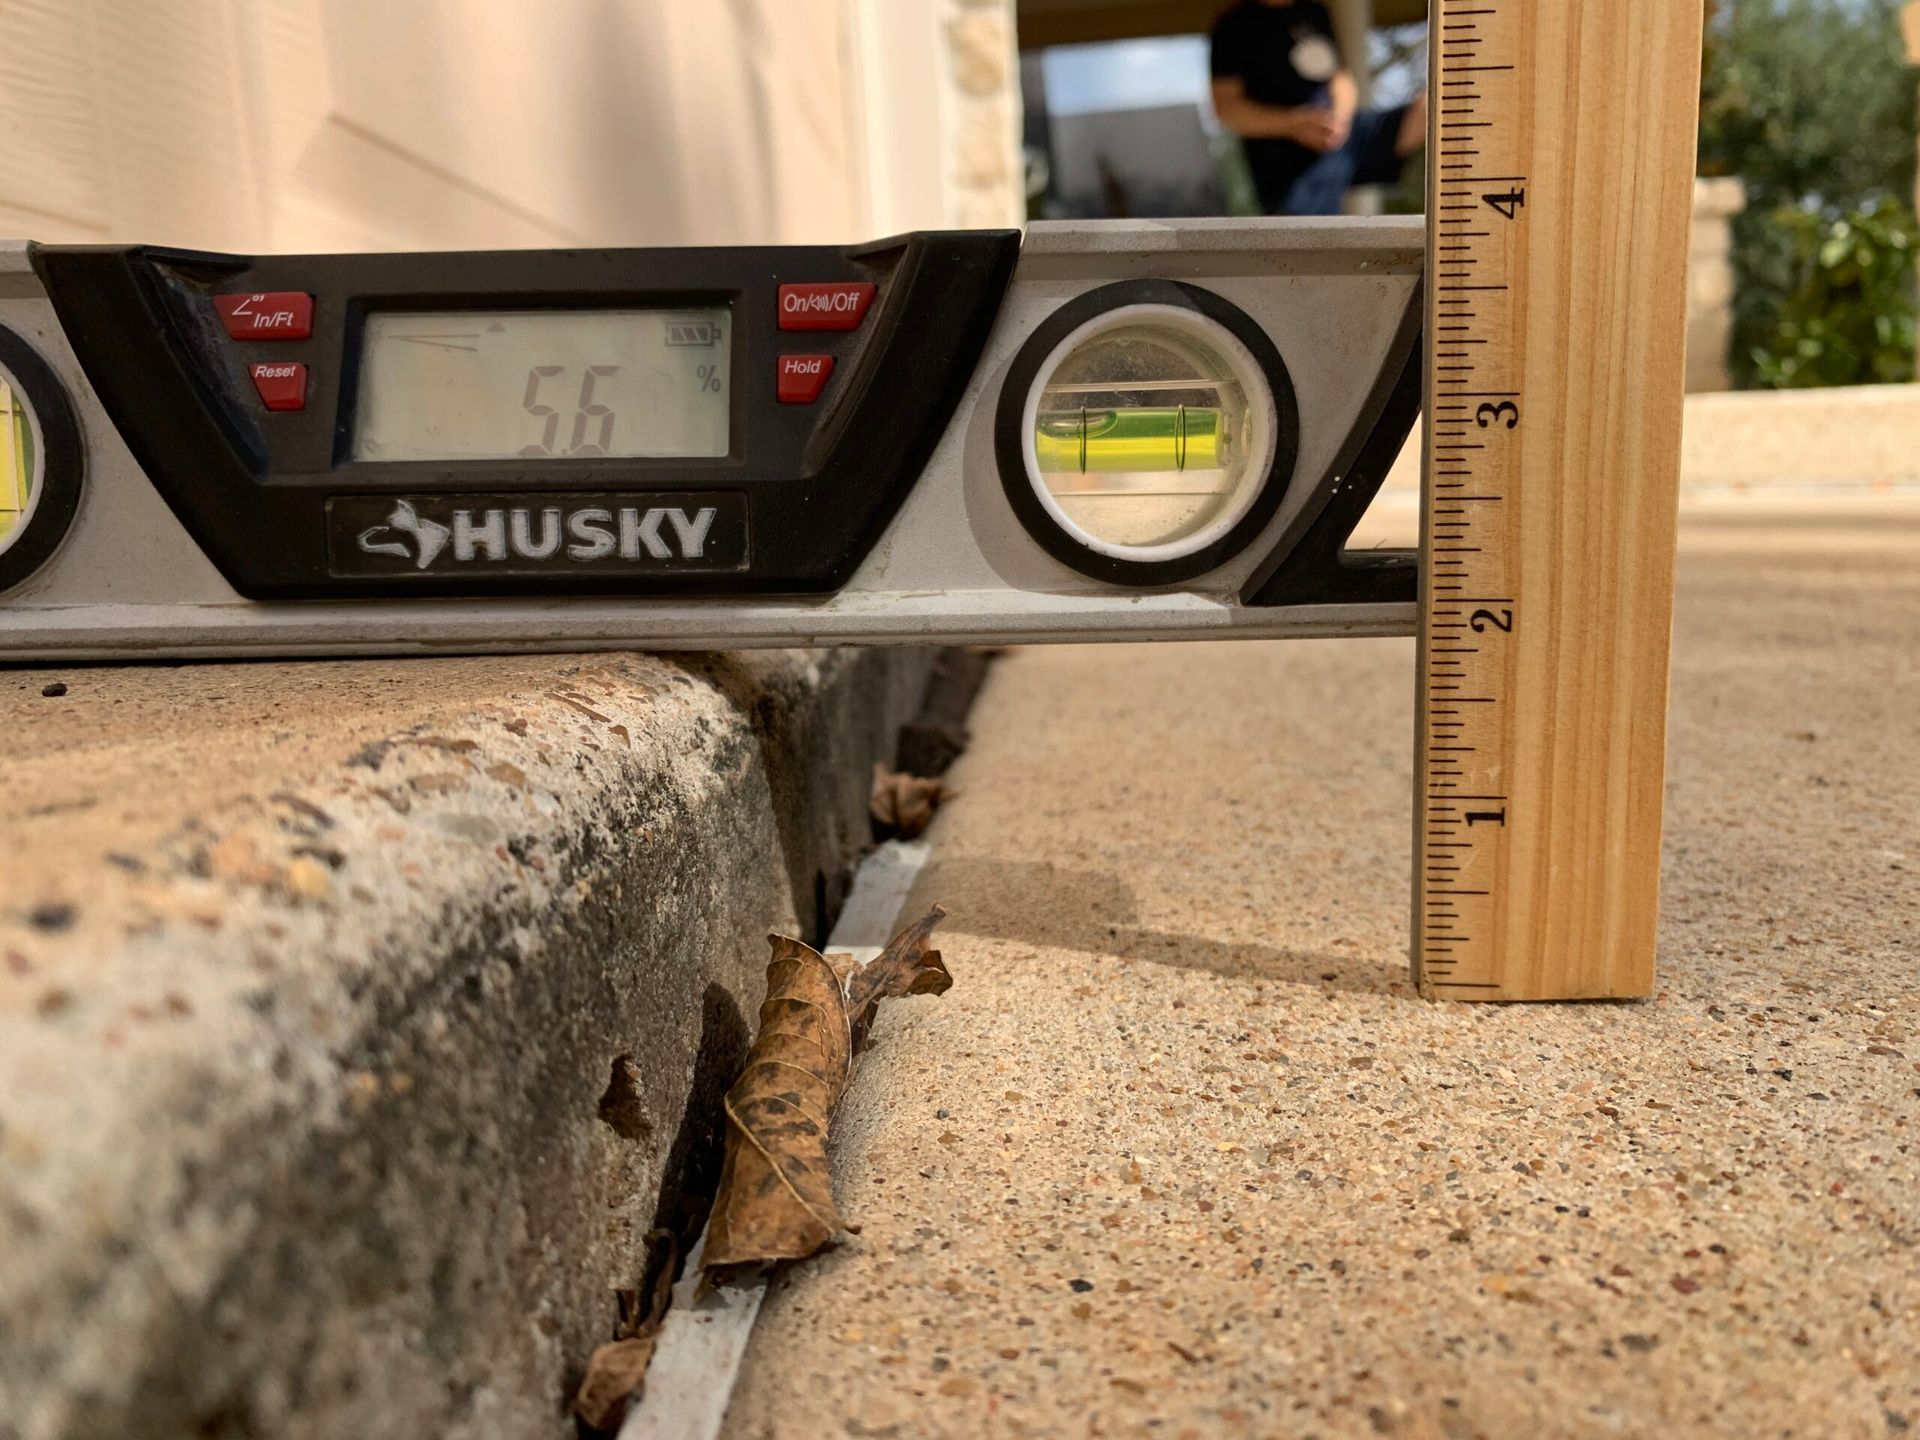 A husky level is being used to measure a concrete surface